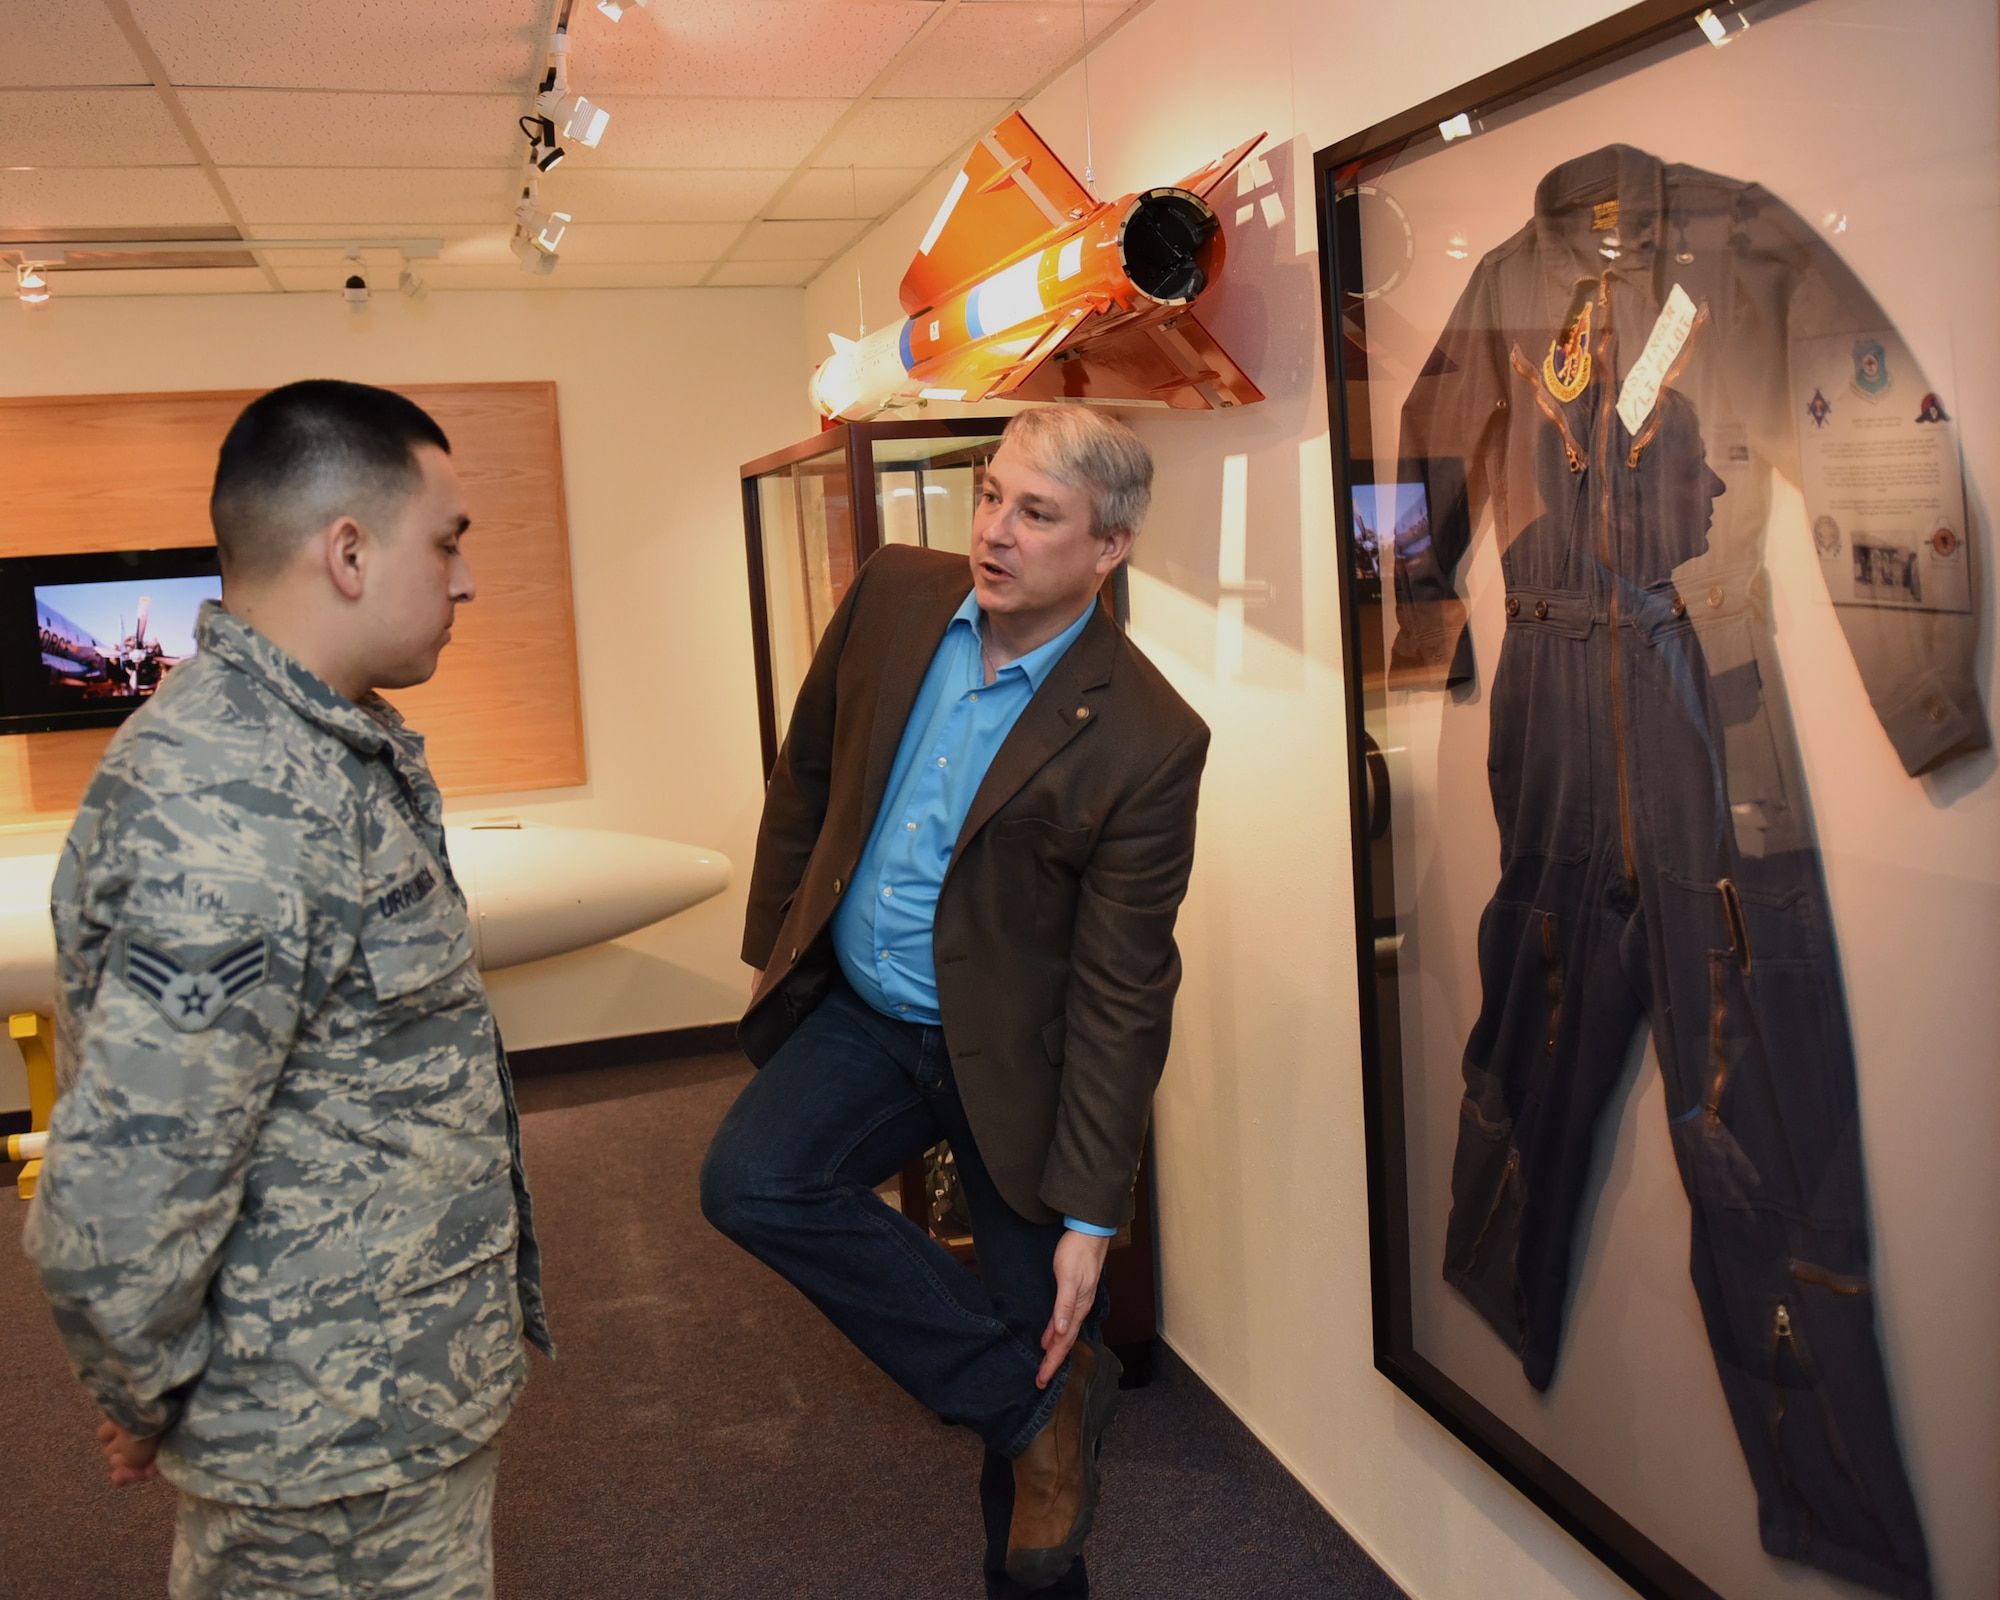 Senior Airman Valverde Urrunaga, 341st Civil Engineer Squadron Water & Fuels Systems Maintenance gets a history lesson about the missileer uniforms from Rob Turnbow, the Malmstrom Historic Exhibit and Air Park curator, Jan. 26, 2017 at Malmstrom Air Force Base, Mont.  The museum contains more than 400 items on display that depicts the history of Malmstrom Air Force Base and the Minuteman program.  (U.S. Air Force photo/Jason Heavner)